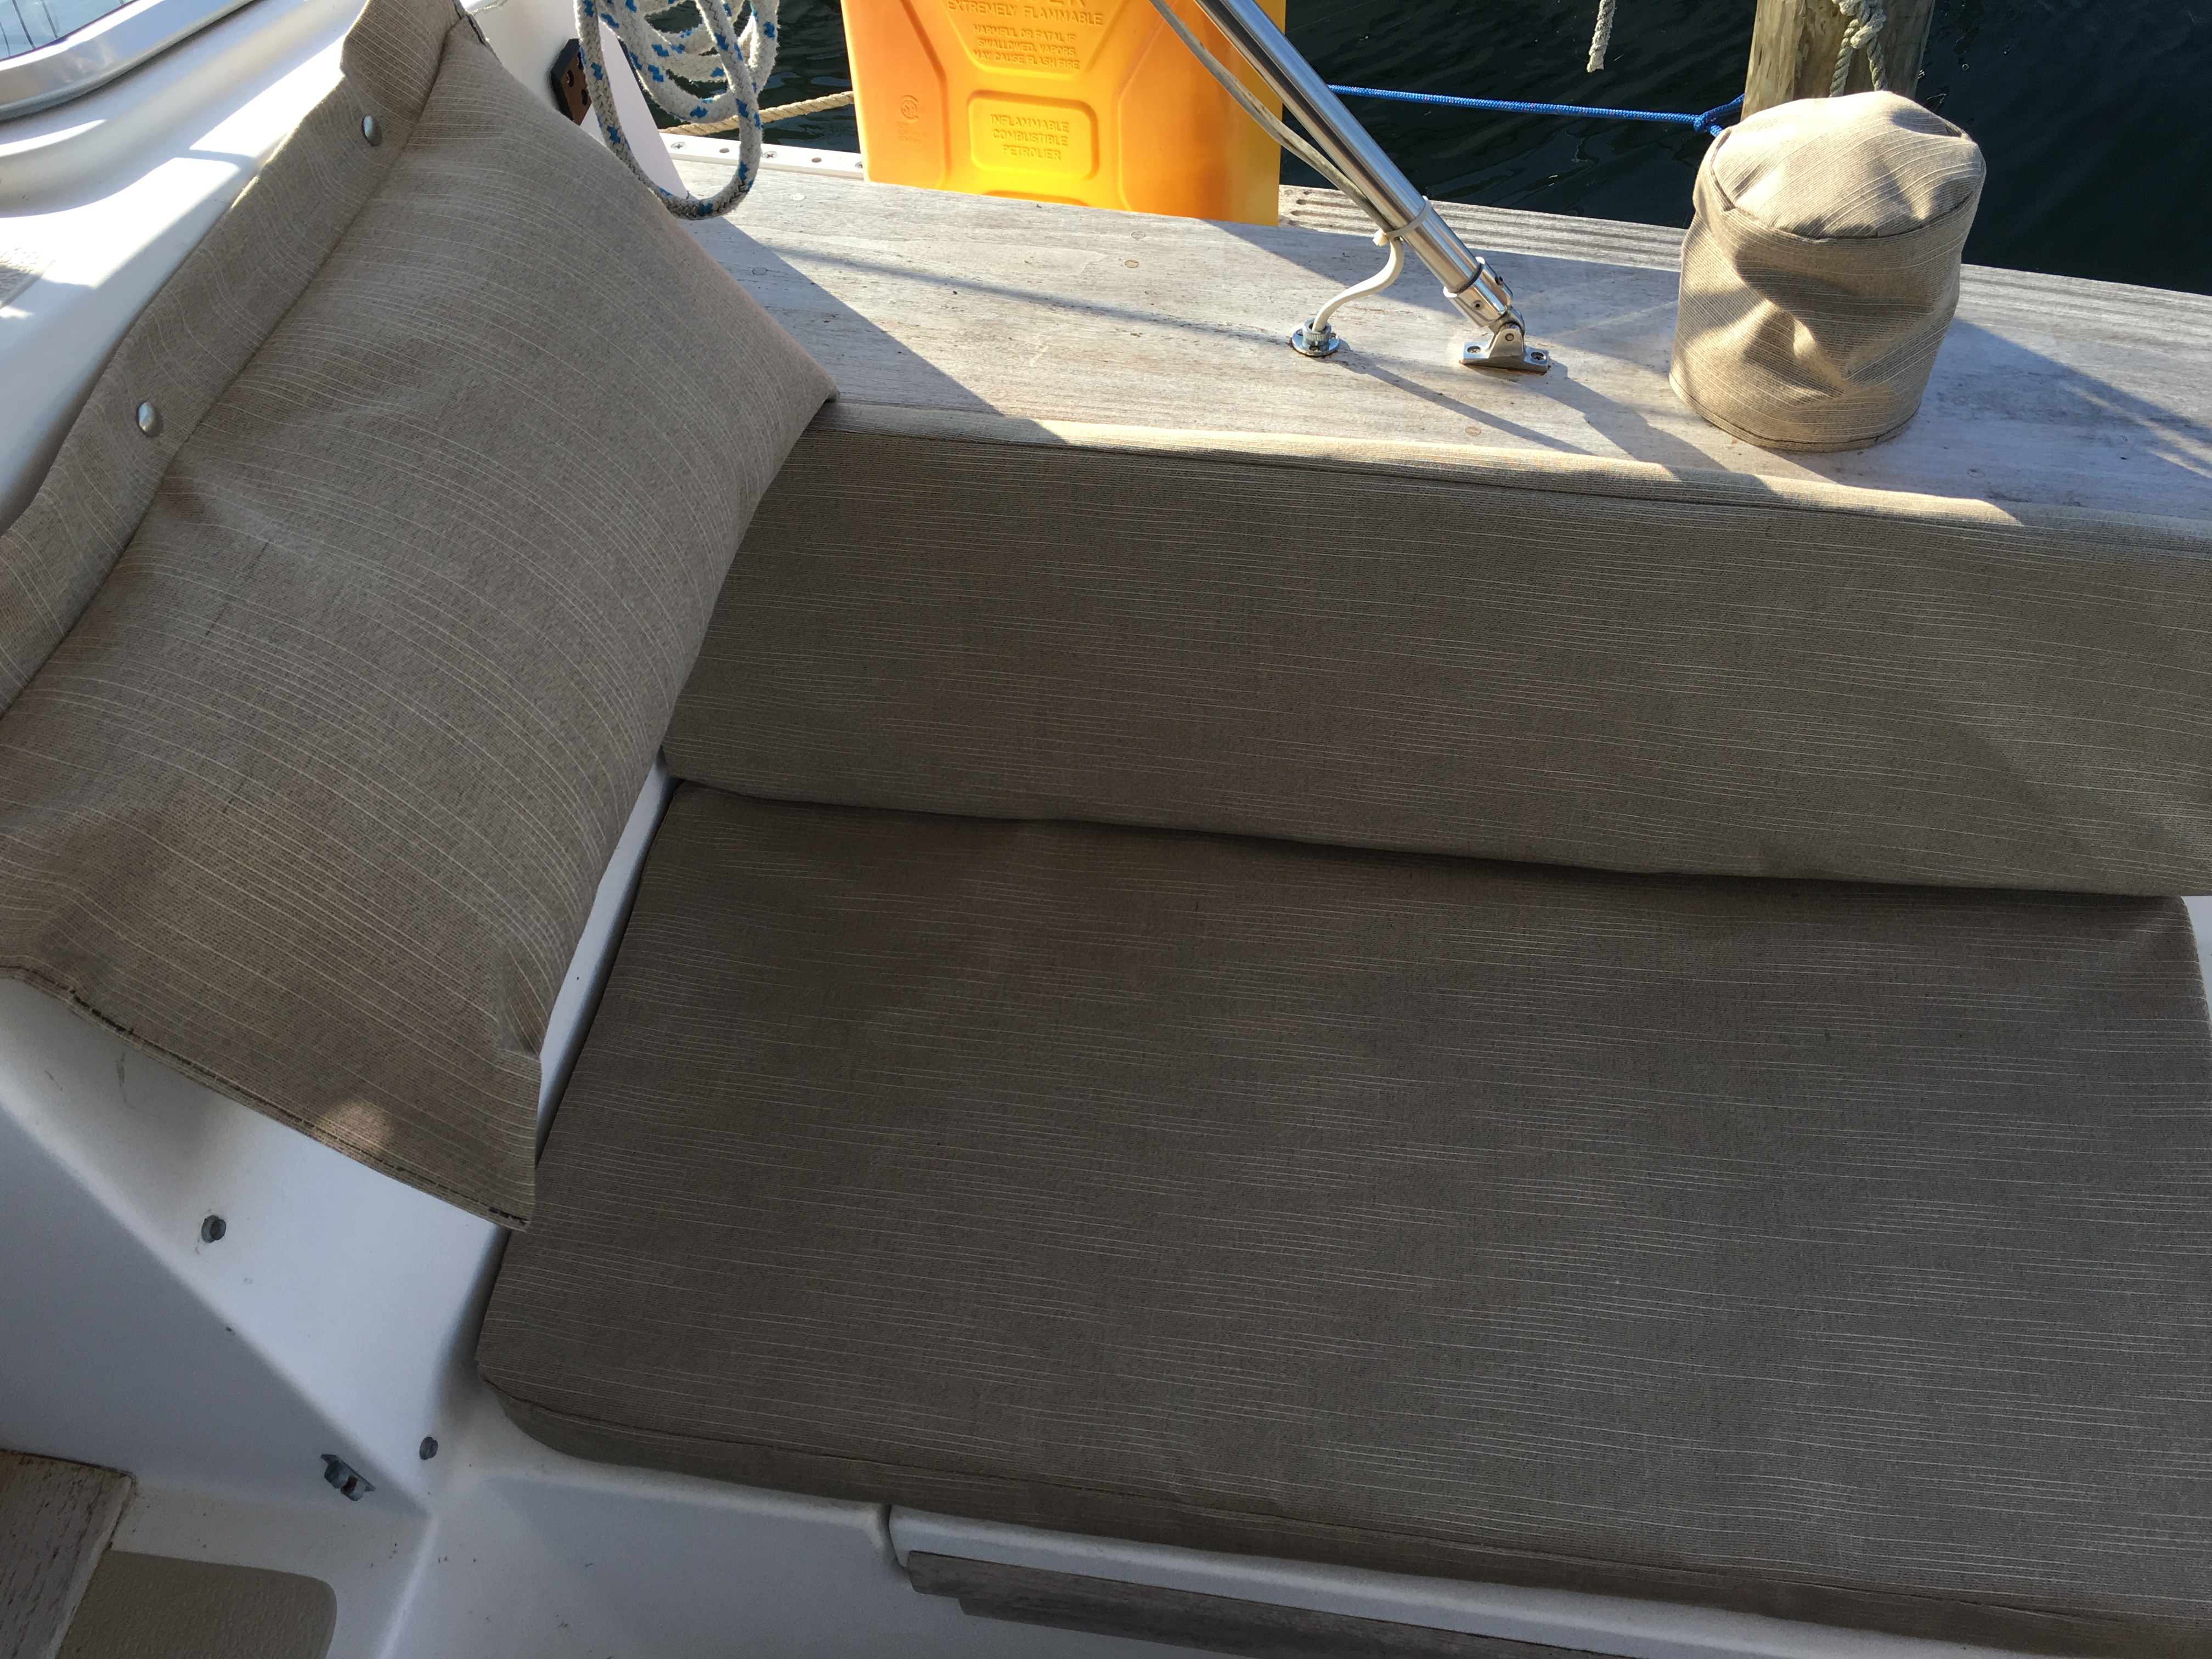 Exterior Upholstery: Cockpit cushions on a 35 foot sailboat